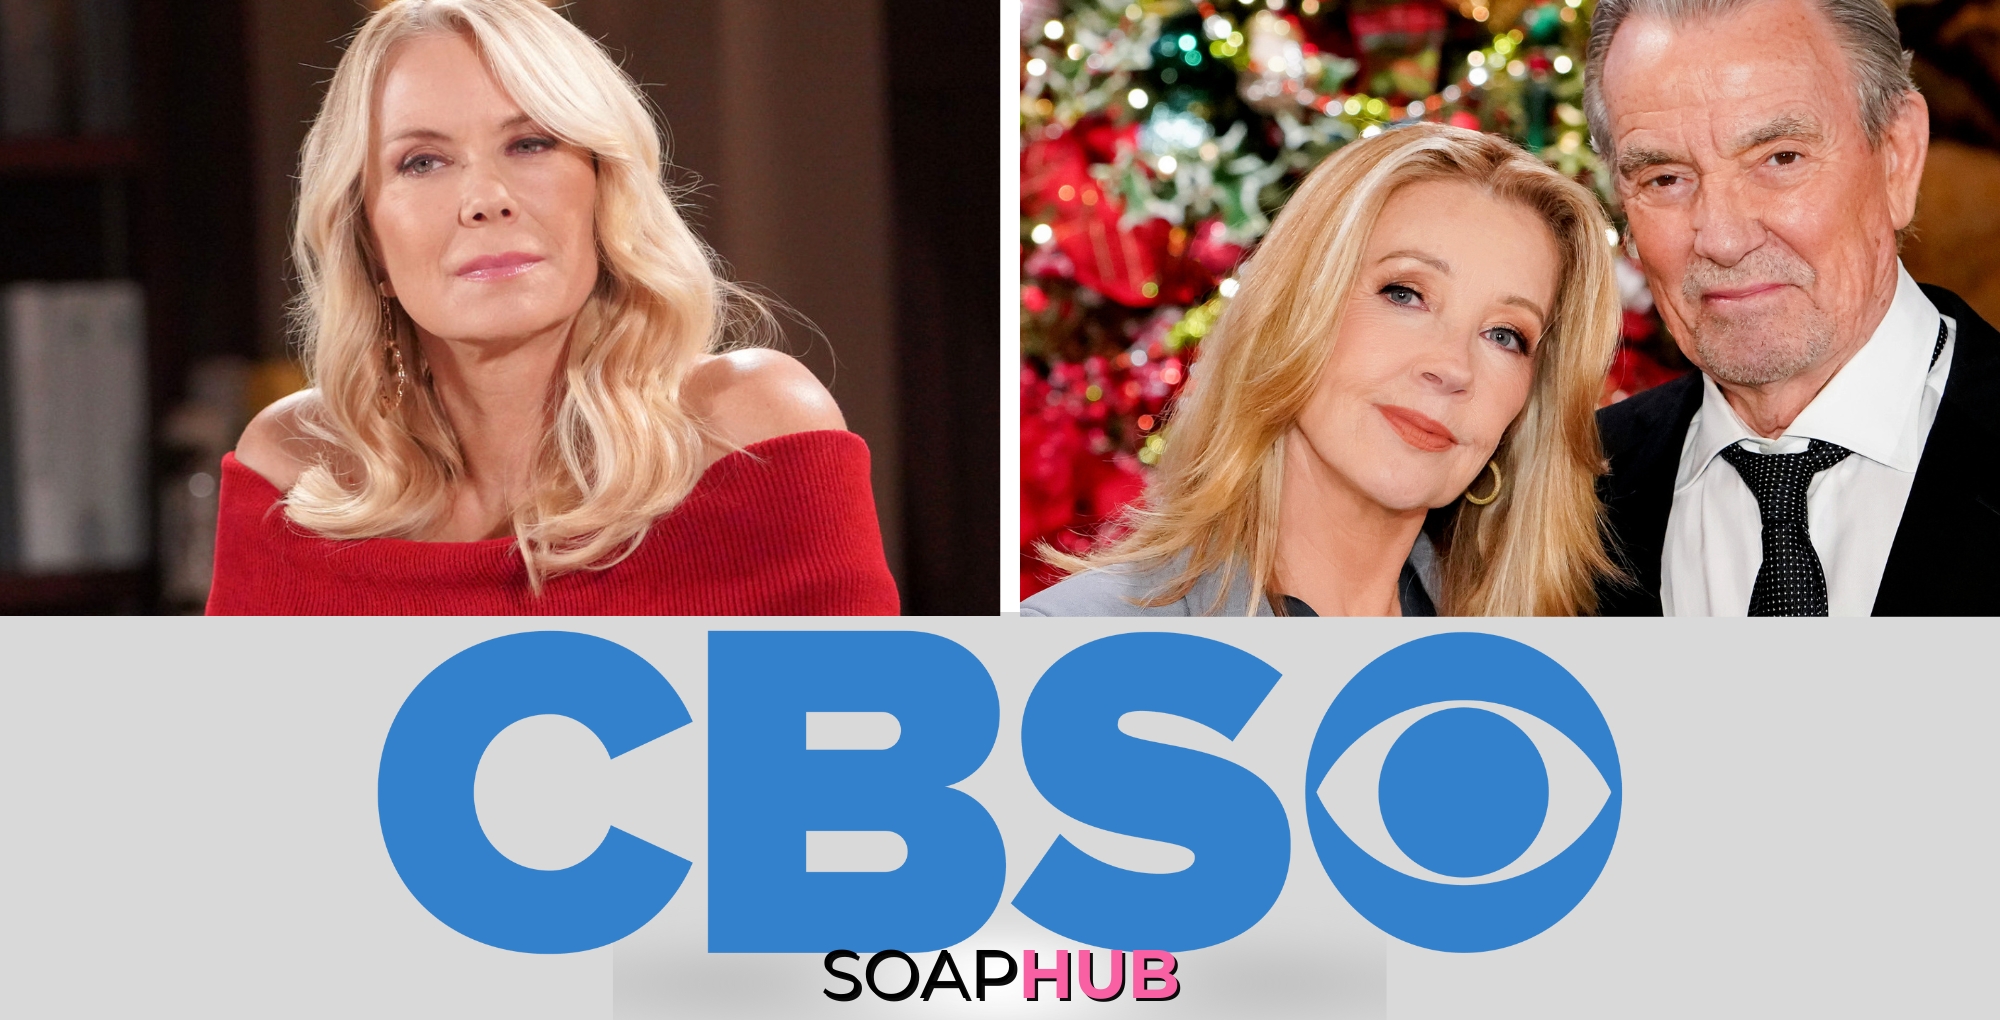 Brooke from The Bold and the Beautiful, Nikki and Victor from The Young and the Restless, the CBS logo, and the Soap Hub logo.